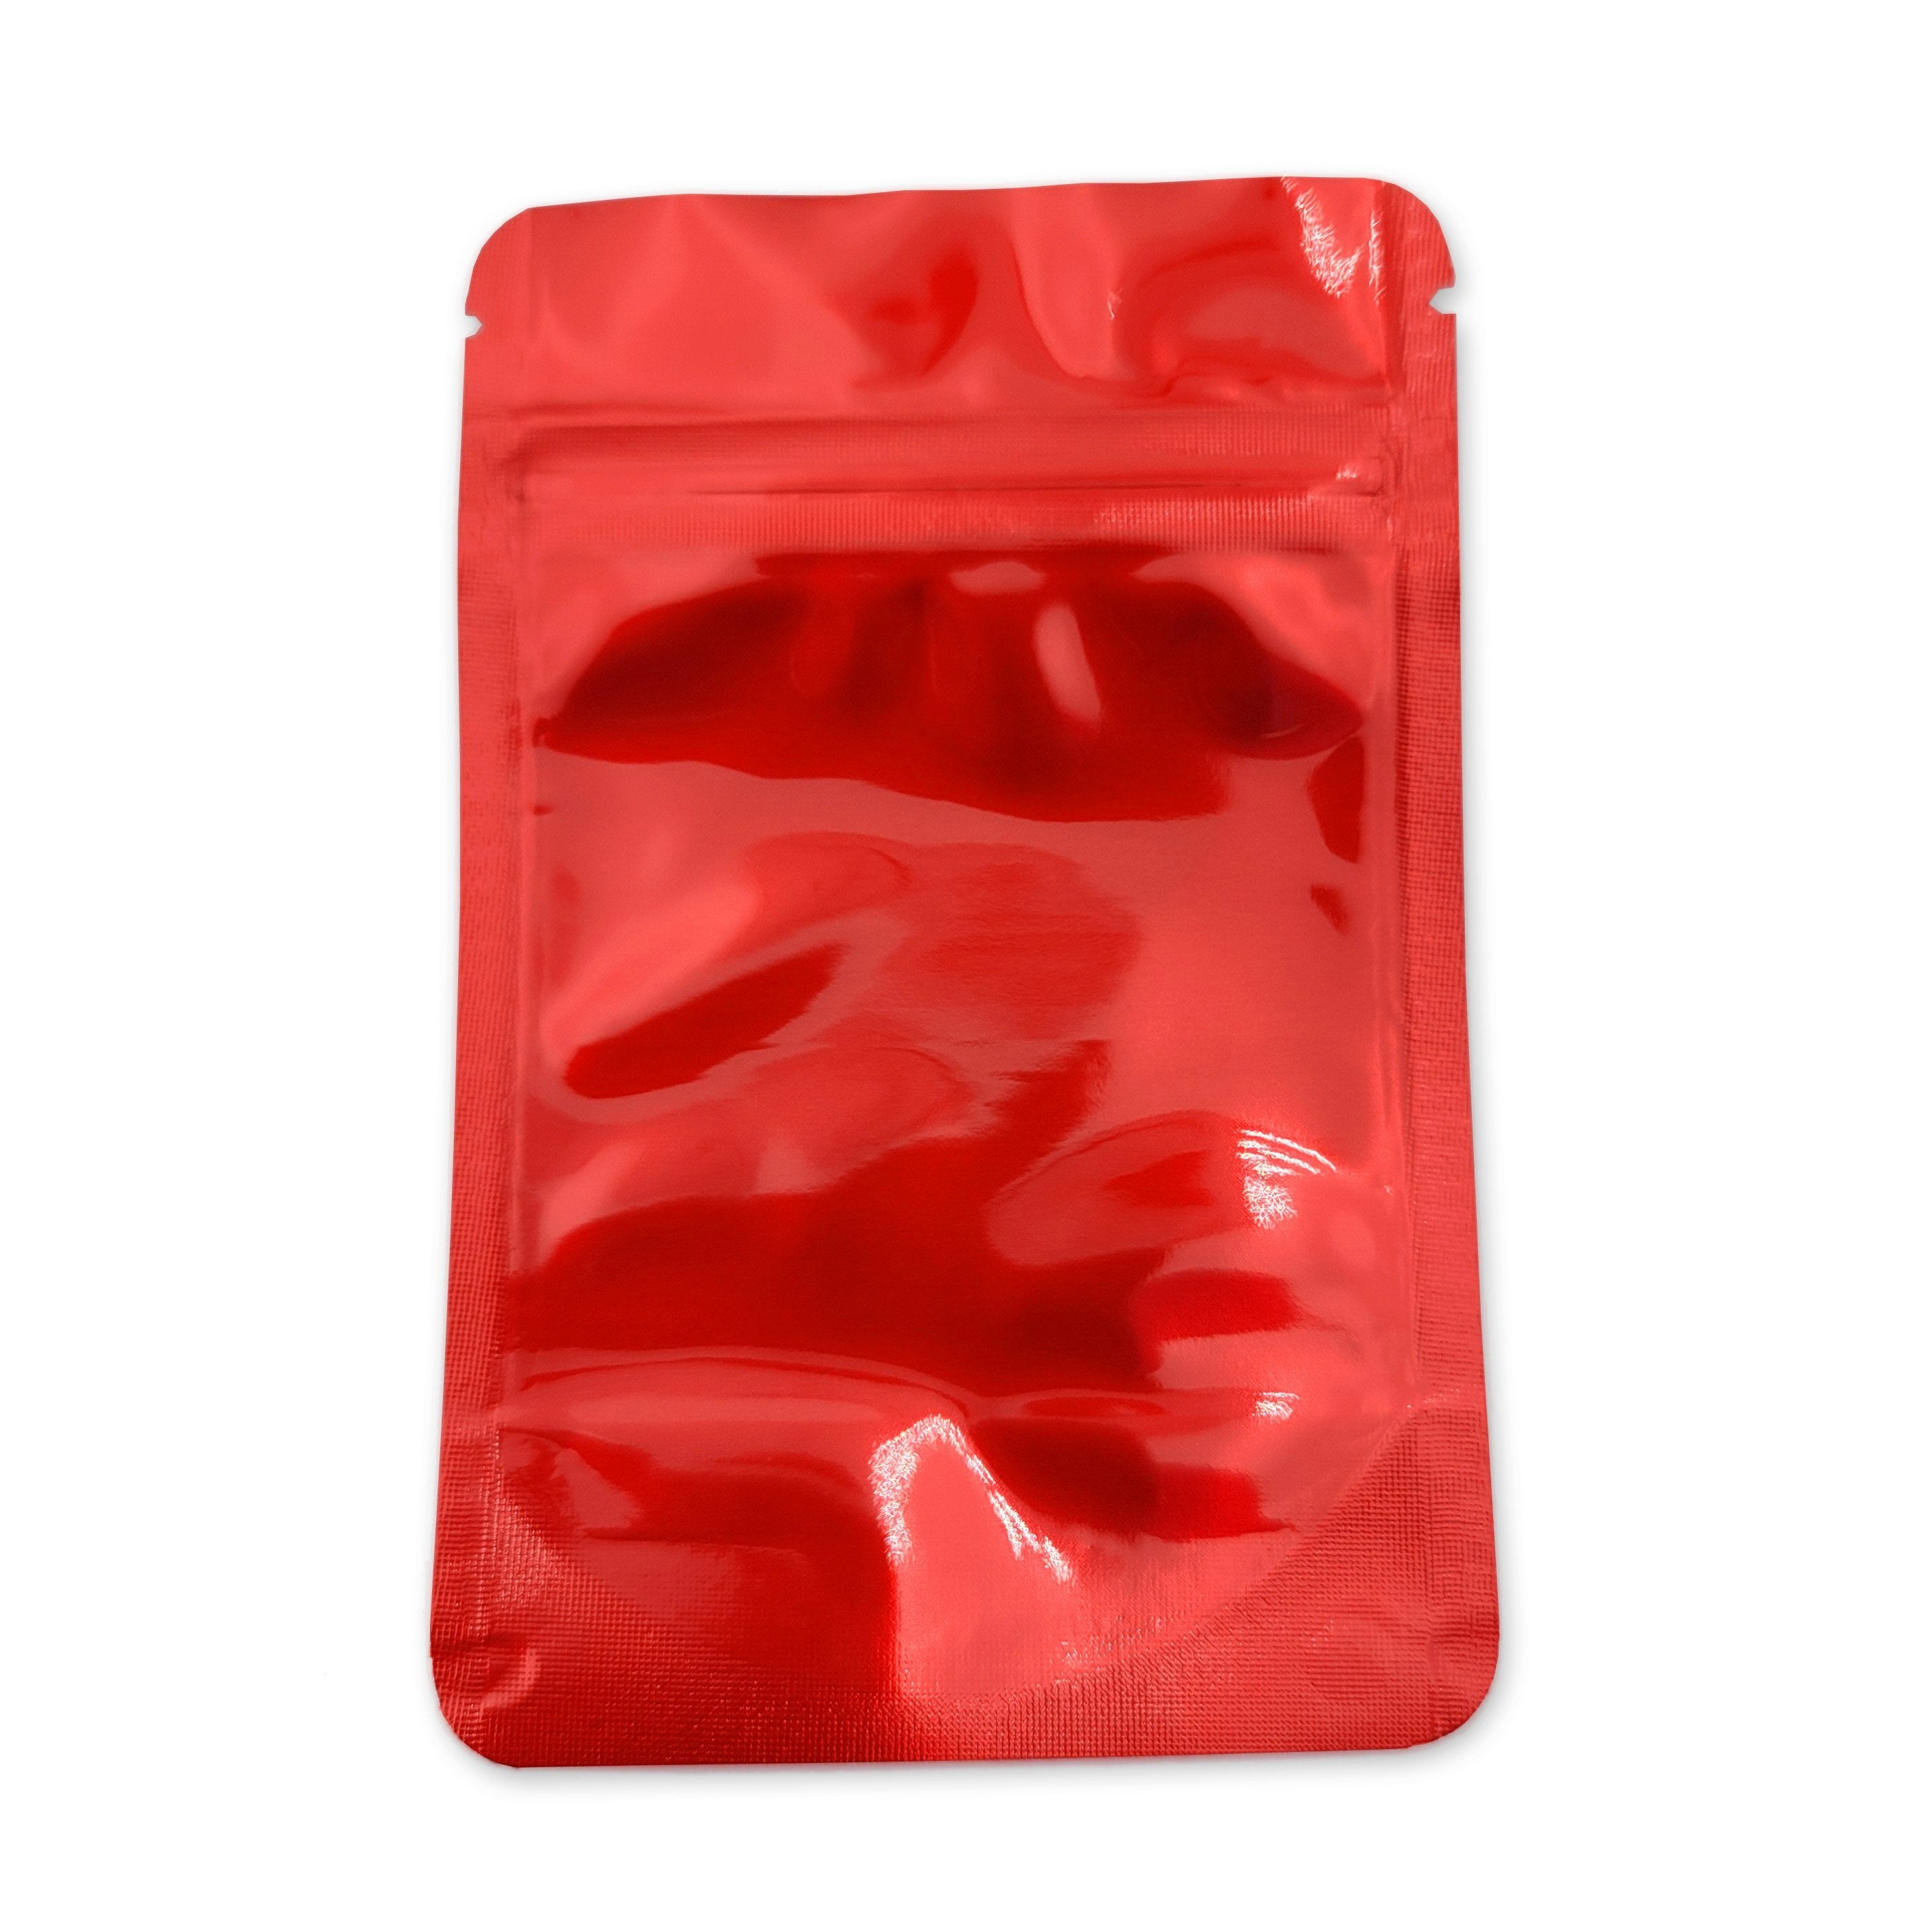 Shiny Series Smell Proof Bag (1/8th) 5.0" x 3.3" Red